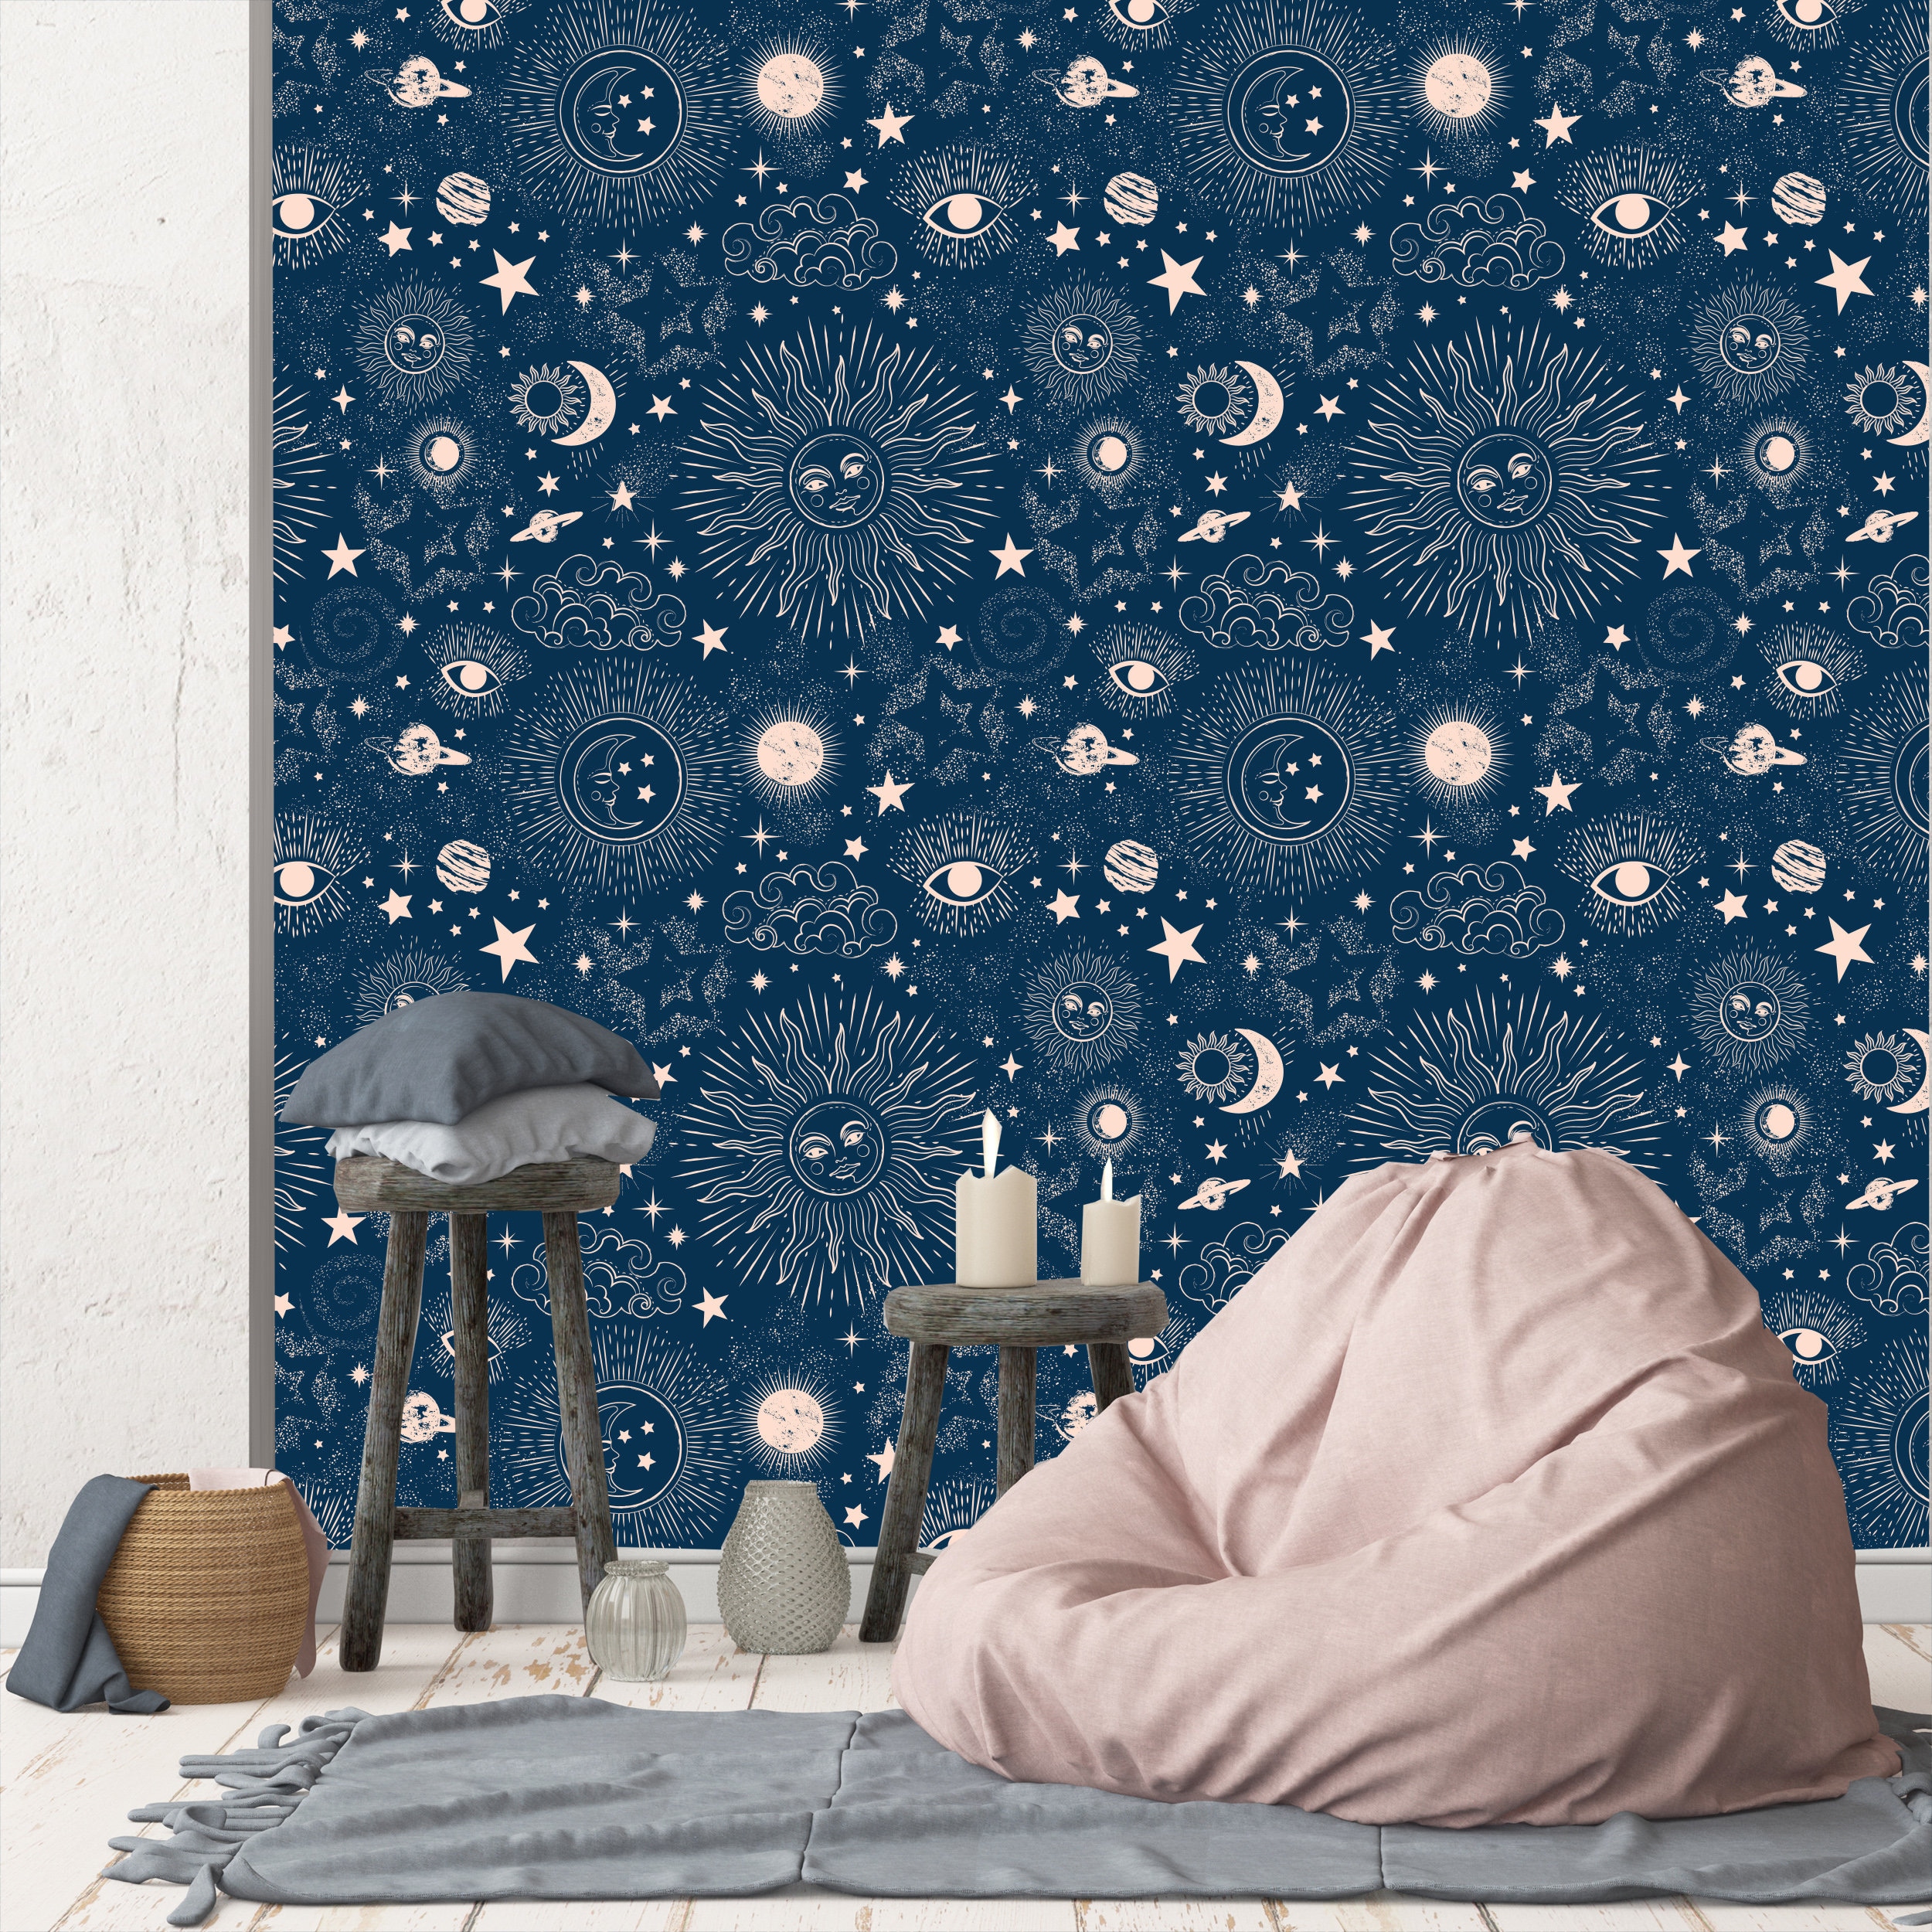 Magical Galaxy Space Nursery Decor Wall Paper Removable - Etsy